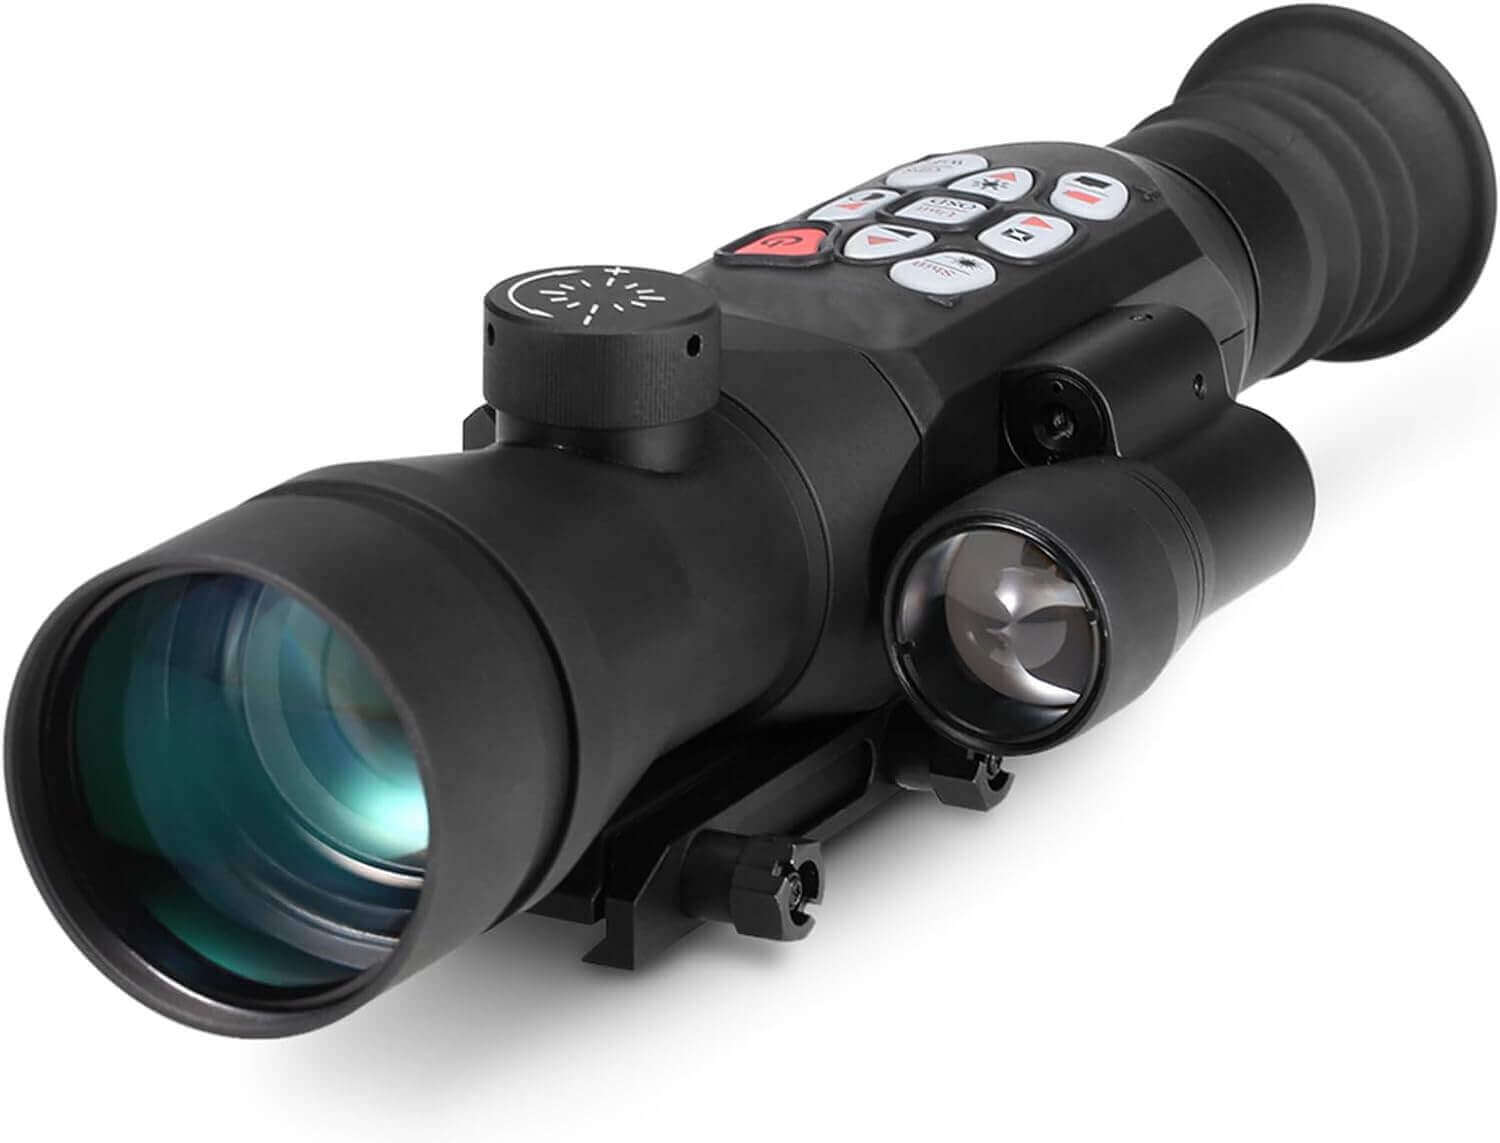 Digital Night Vision Scope Review